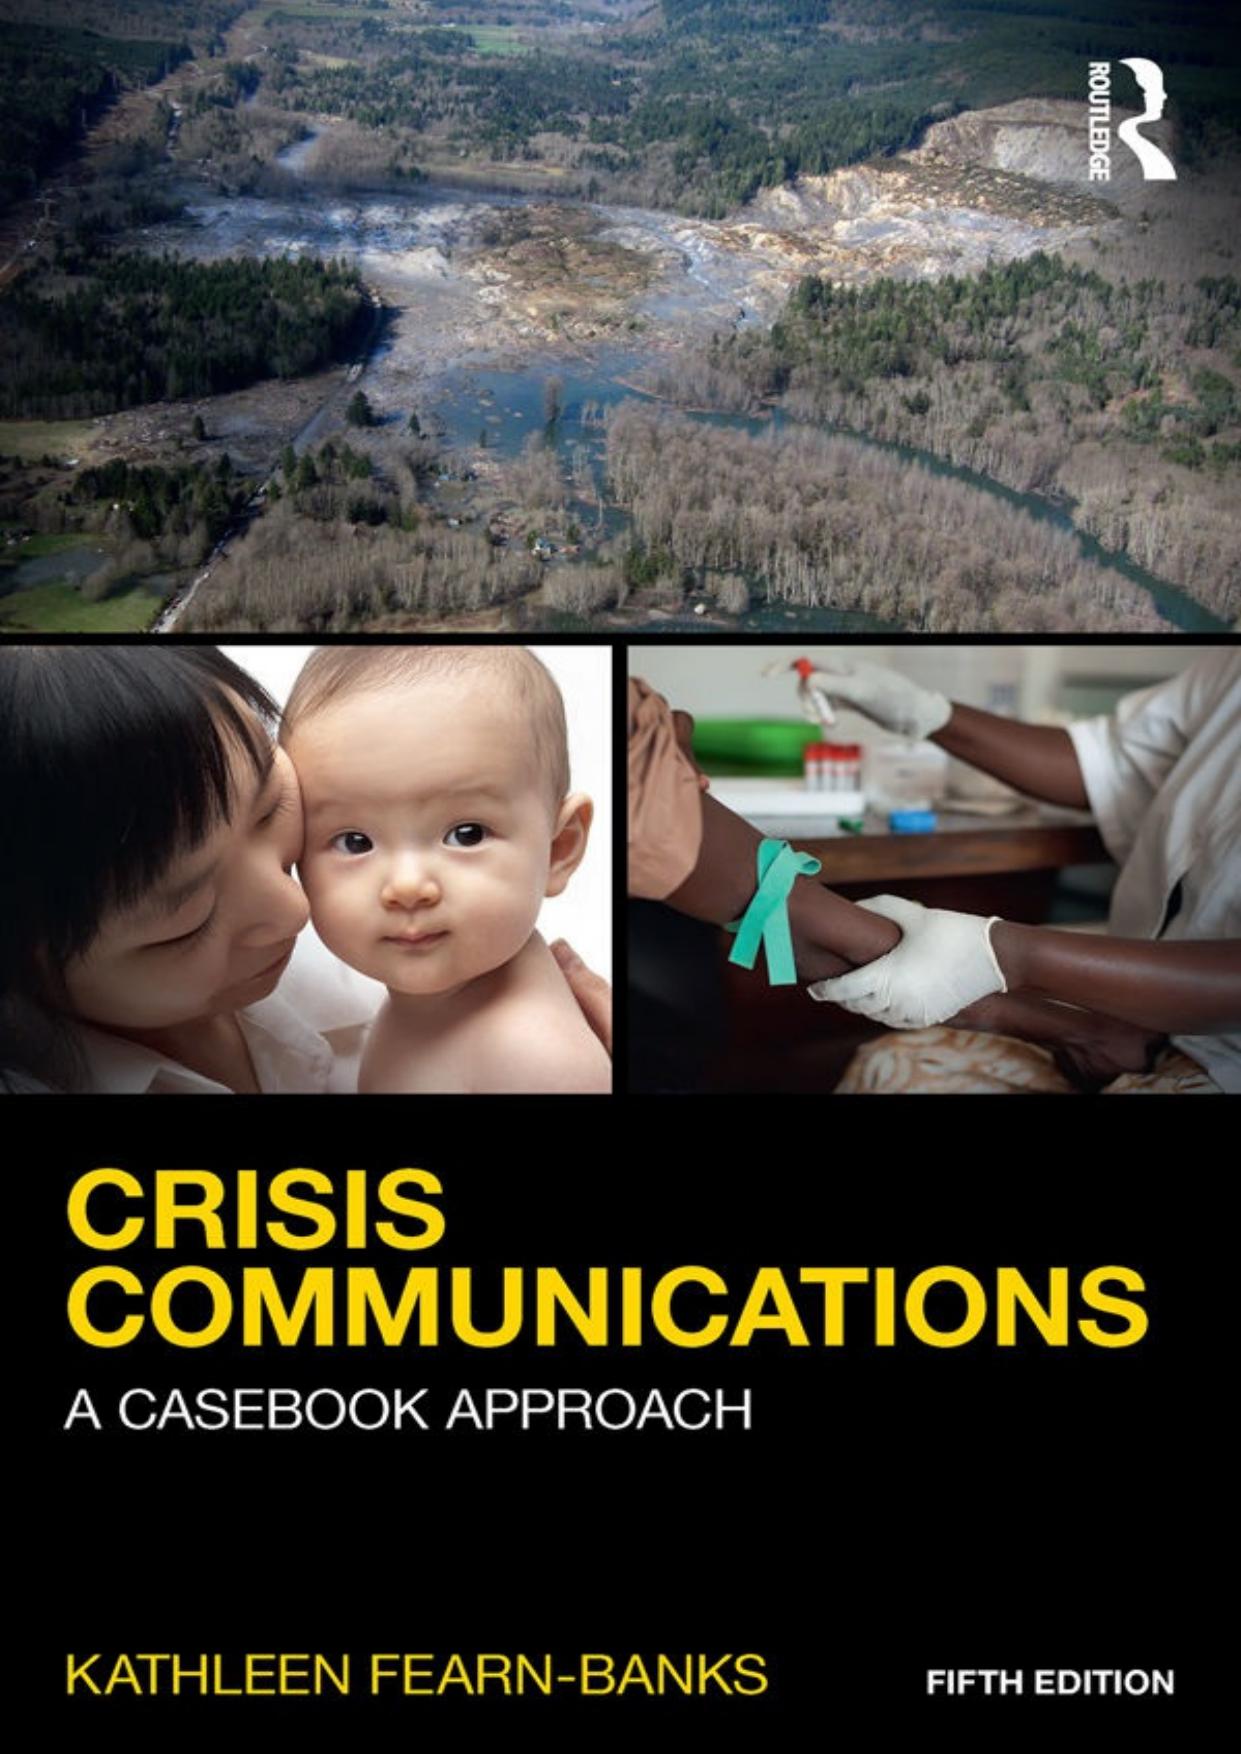 Crisis Communications_ A Casebook Approach (Routledge Communication Series) - Kathleen Fearn-Banks.jpg